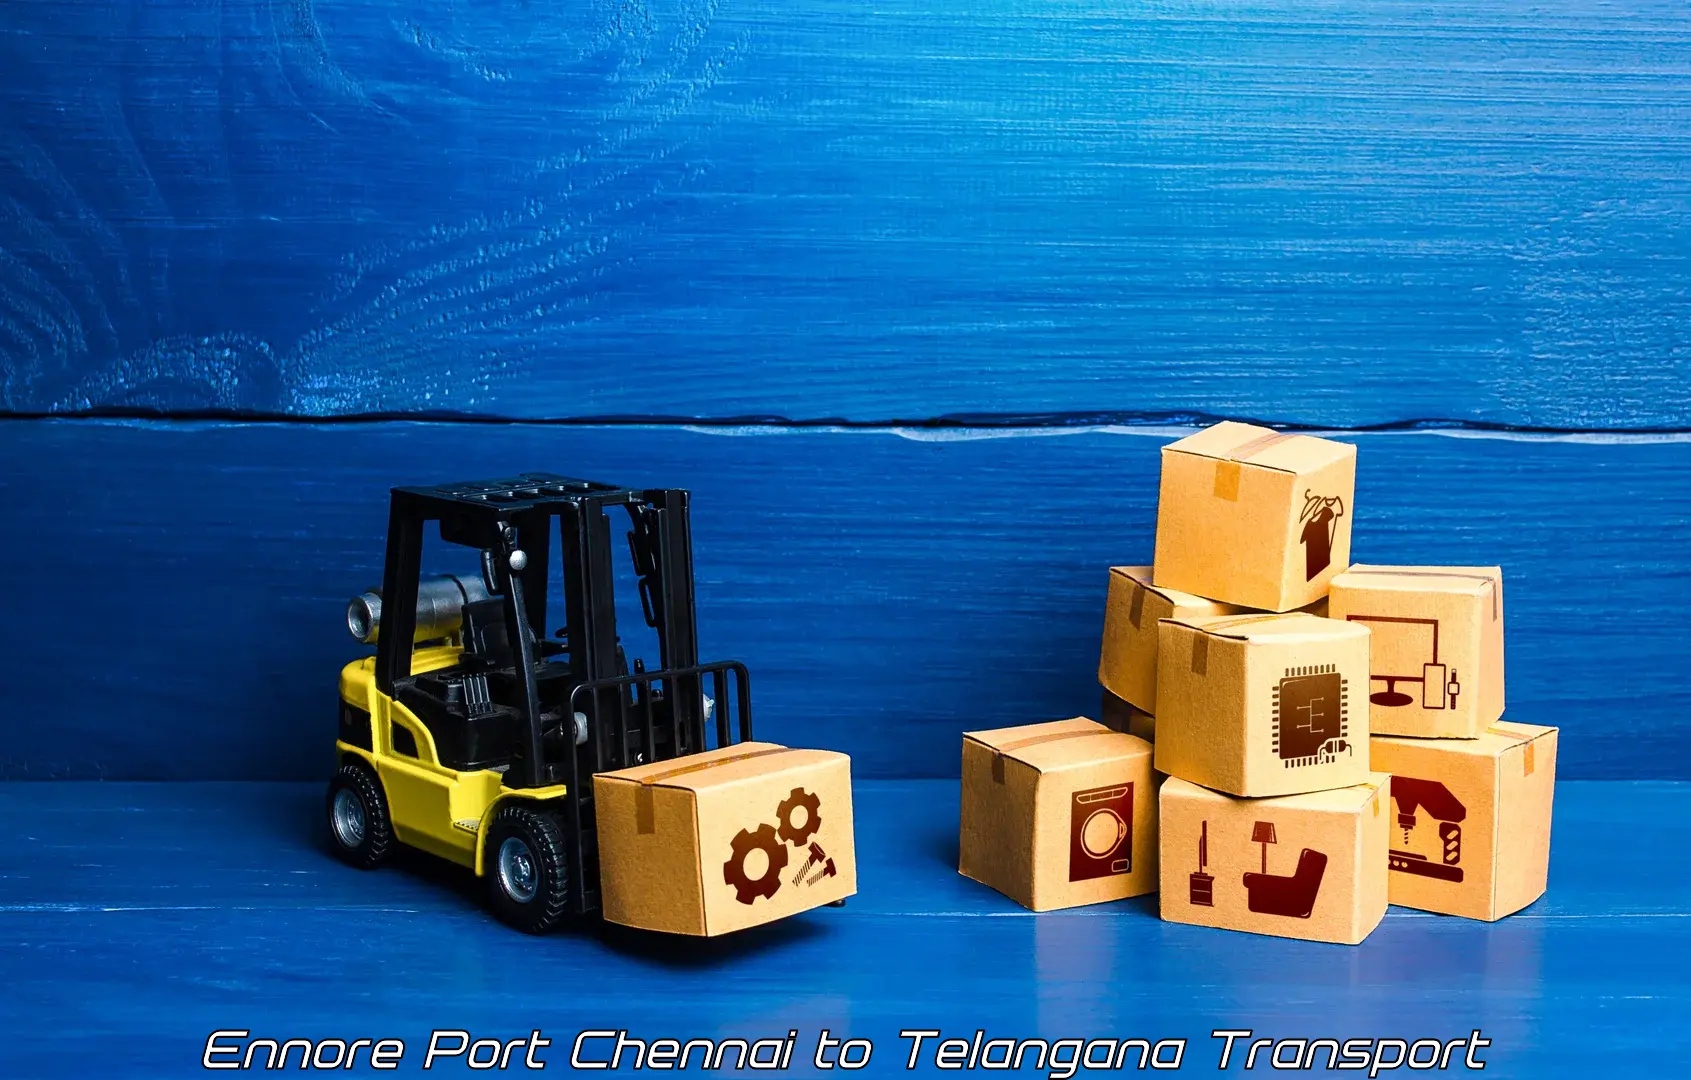 Truck transport companies in India Ennore Port Chennai to Sircilla